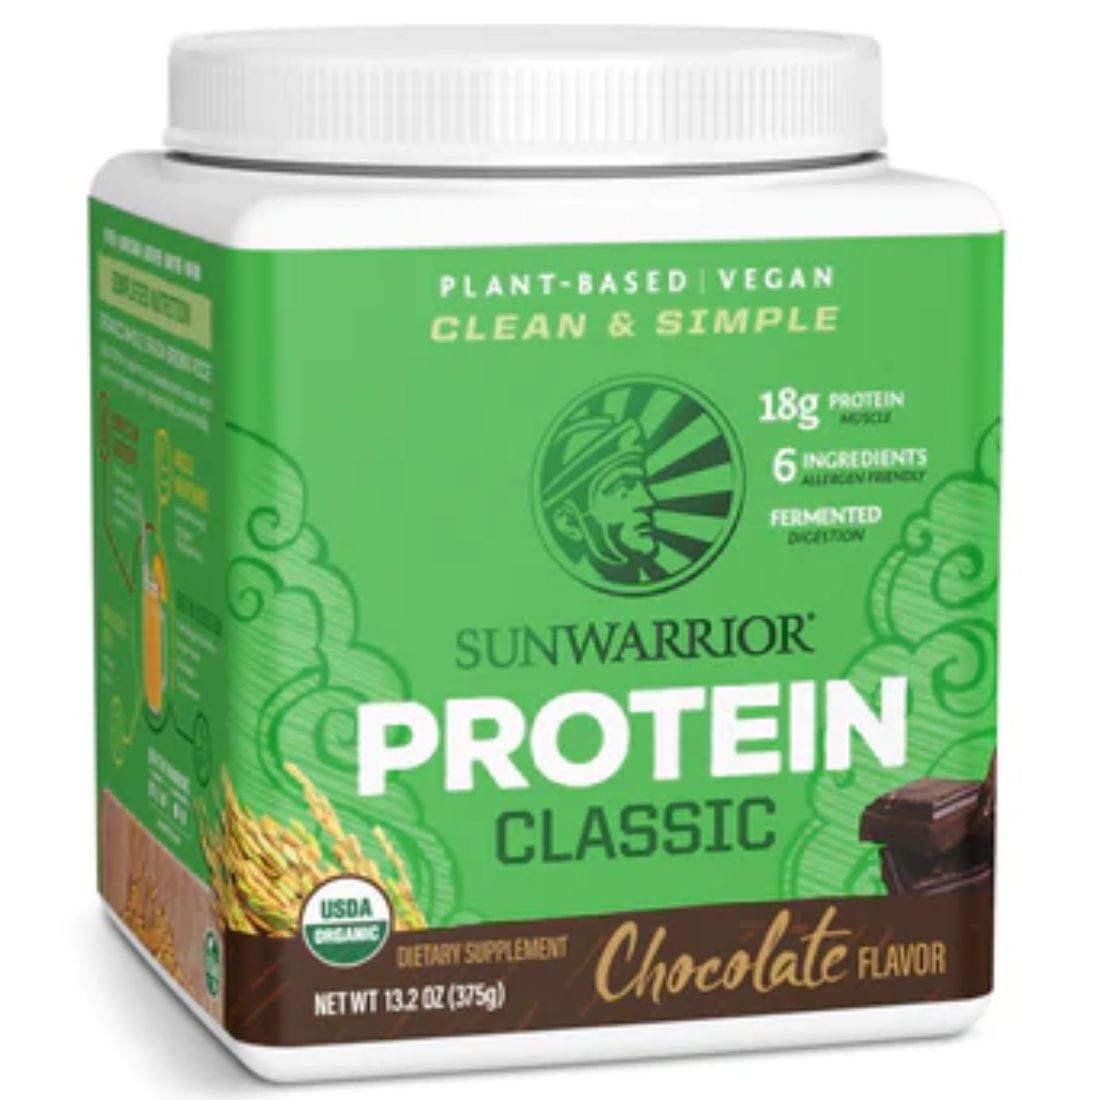 Sun Warrior Protein Classic Sprouted Brown Rice Protein, Raw Vegan Fermented Protein